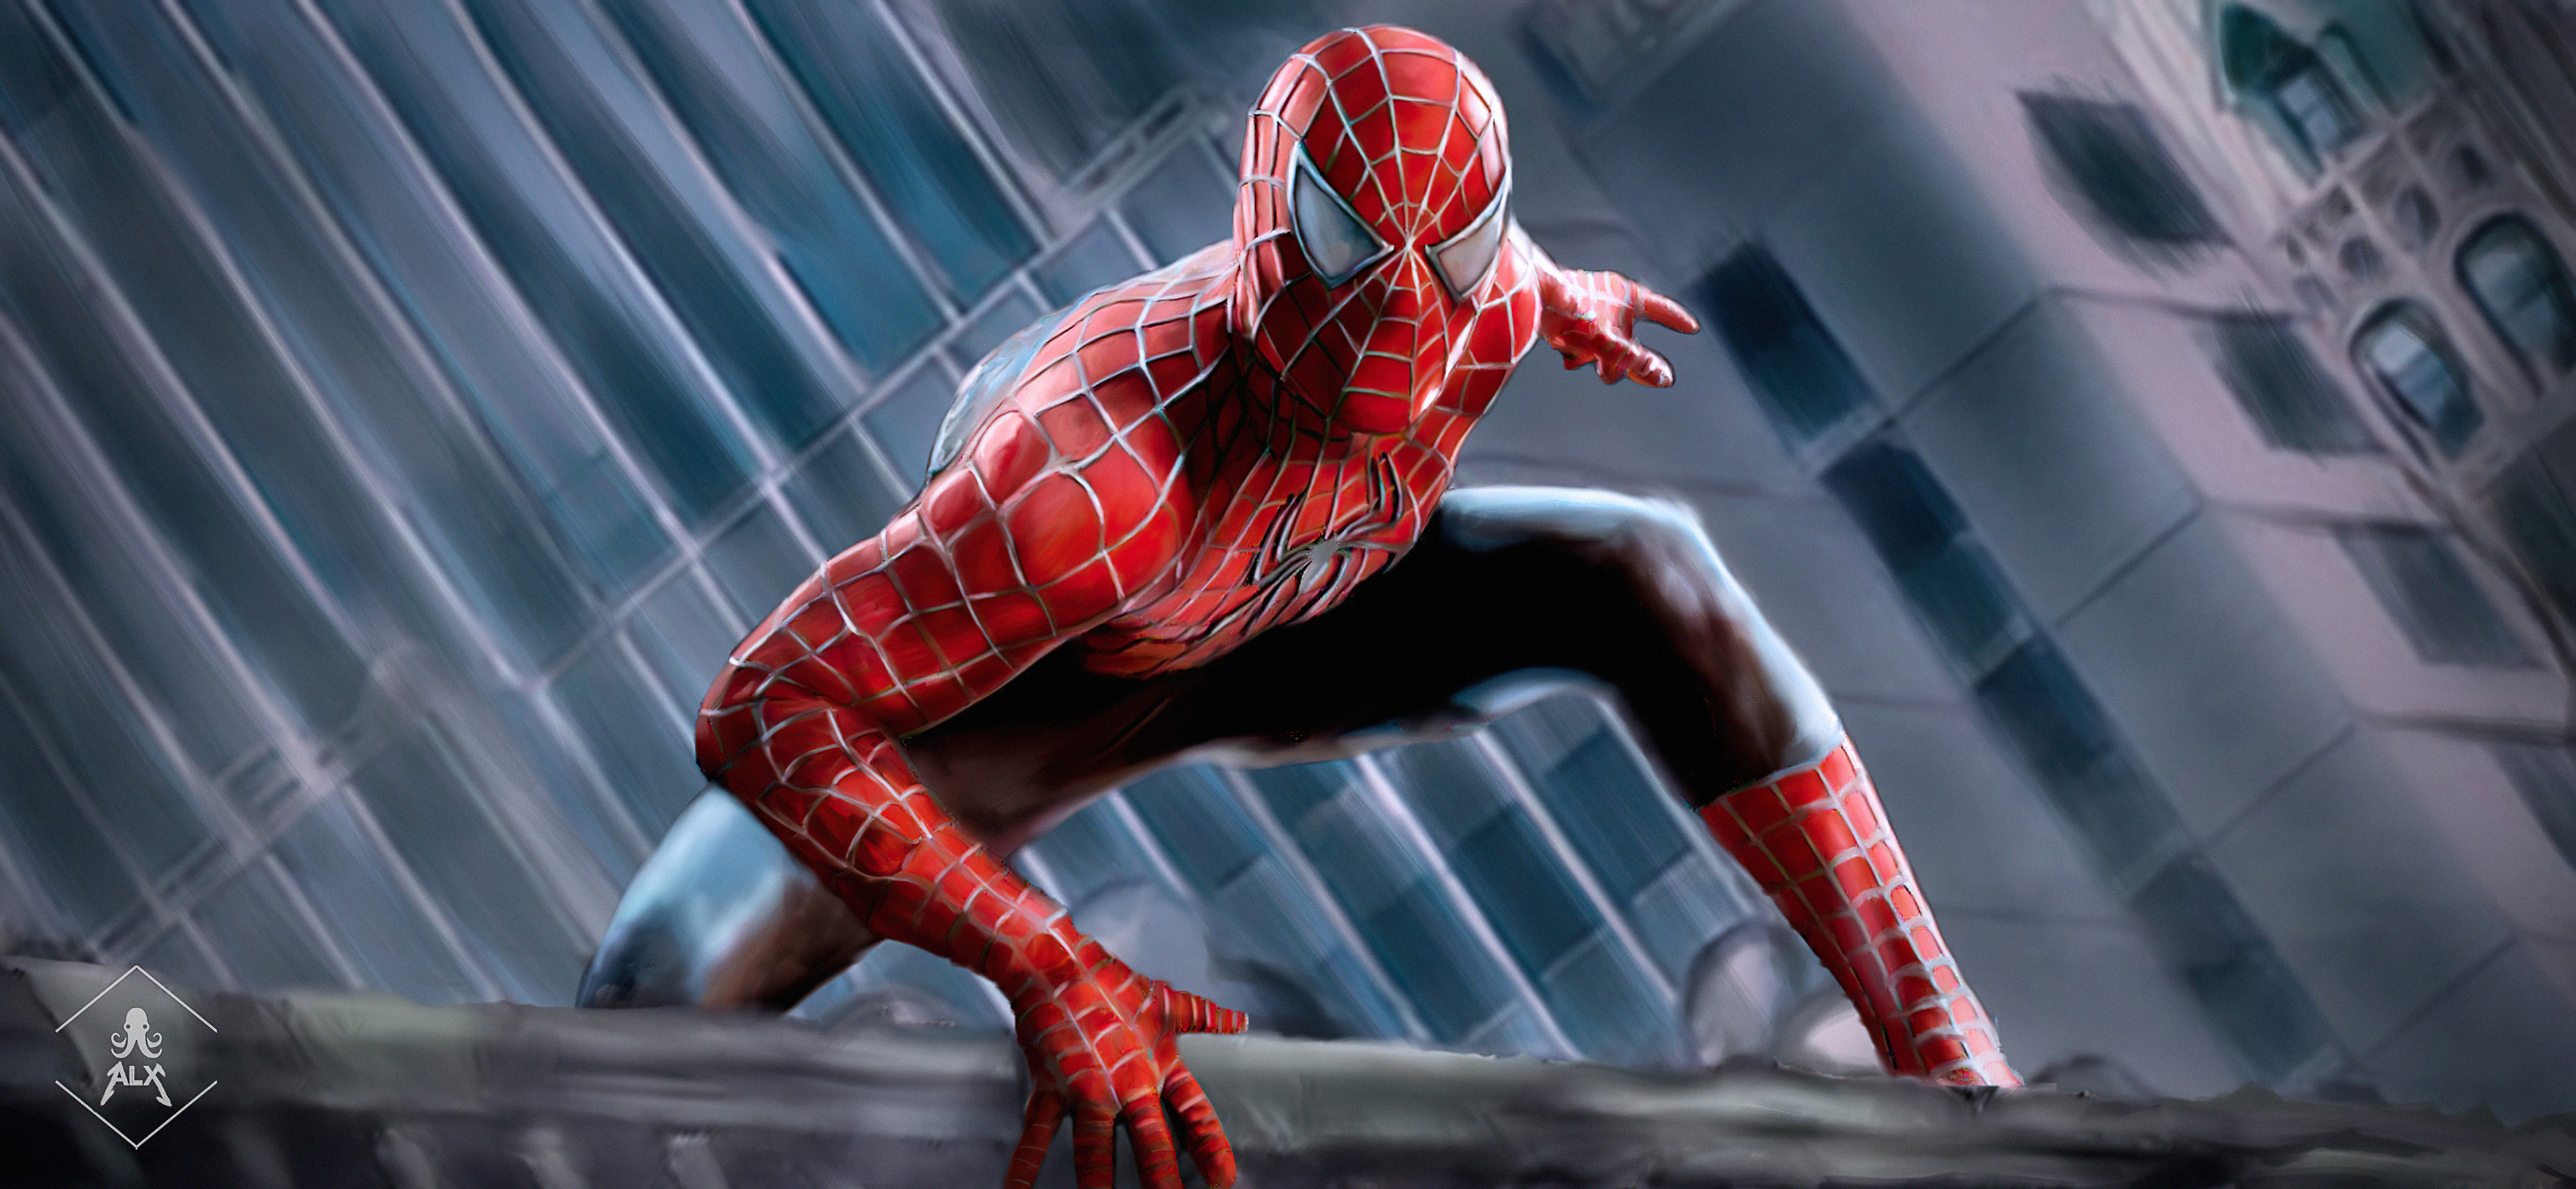 Spiderman Raimi Suit 4k Hd Superheroes 4k Wallpapers Images Backgrounds Photos And Pictures